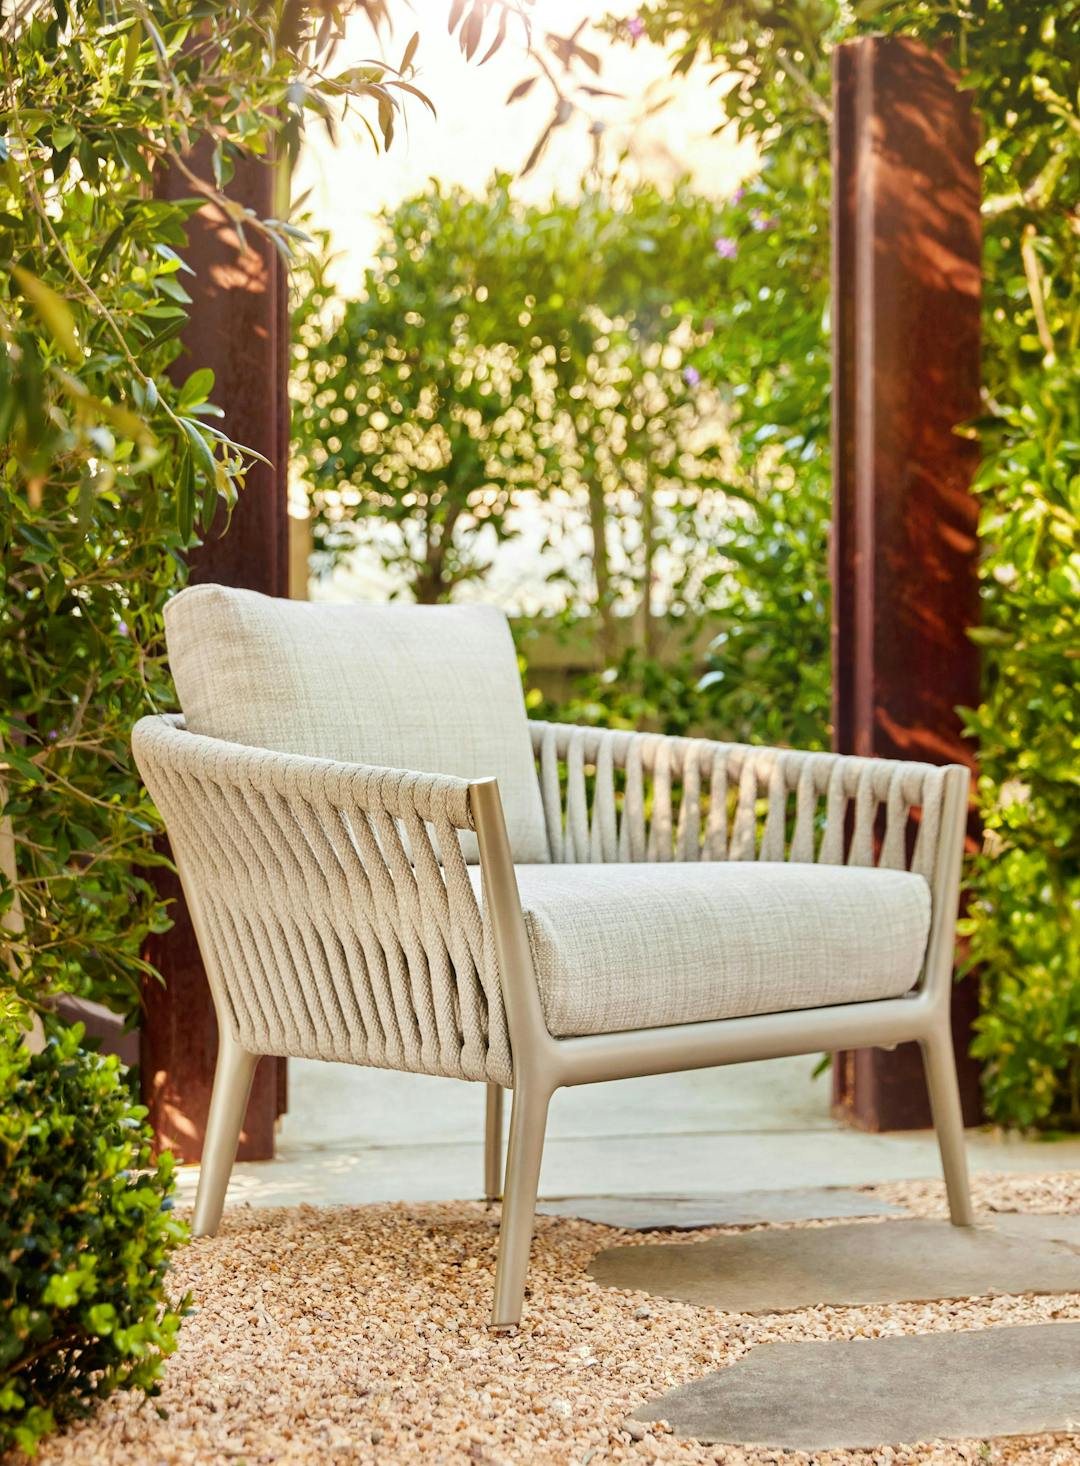 Lounge chair with white fabric and finish cropped close with 2 red poles and greenery behind. H Lounge was designed by Toan Nguyen.